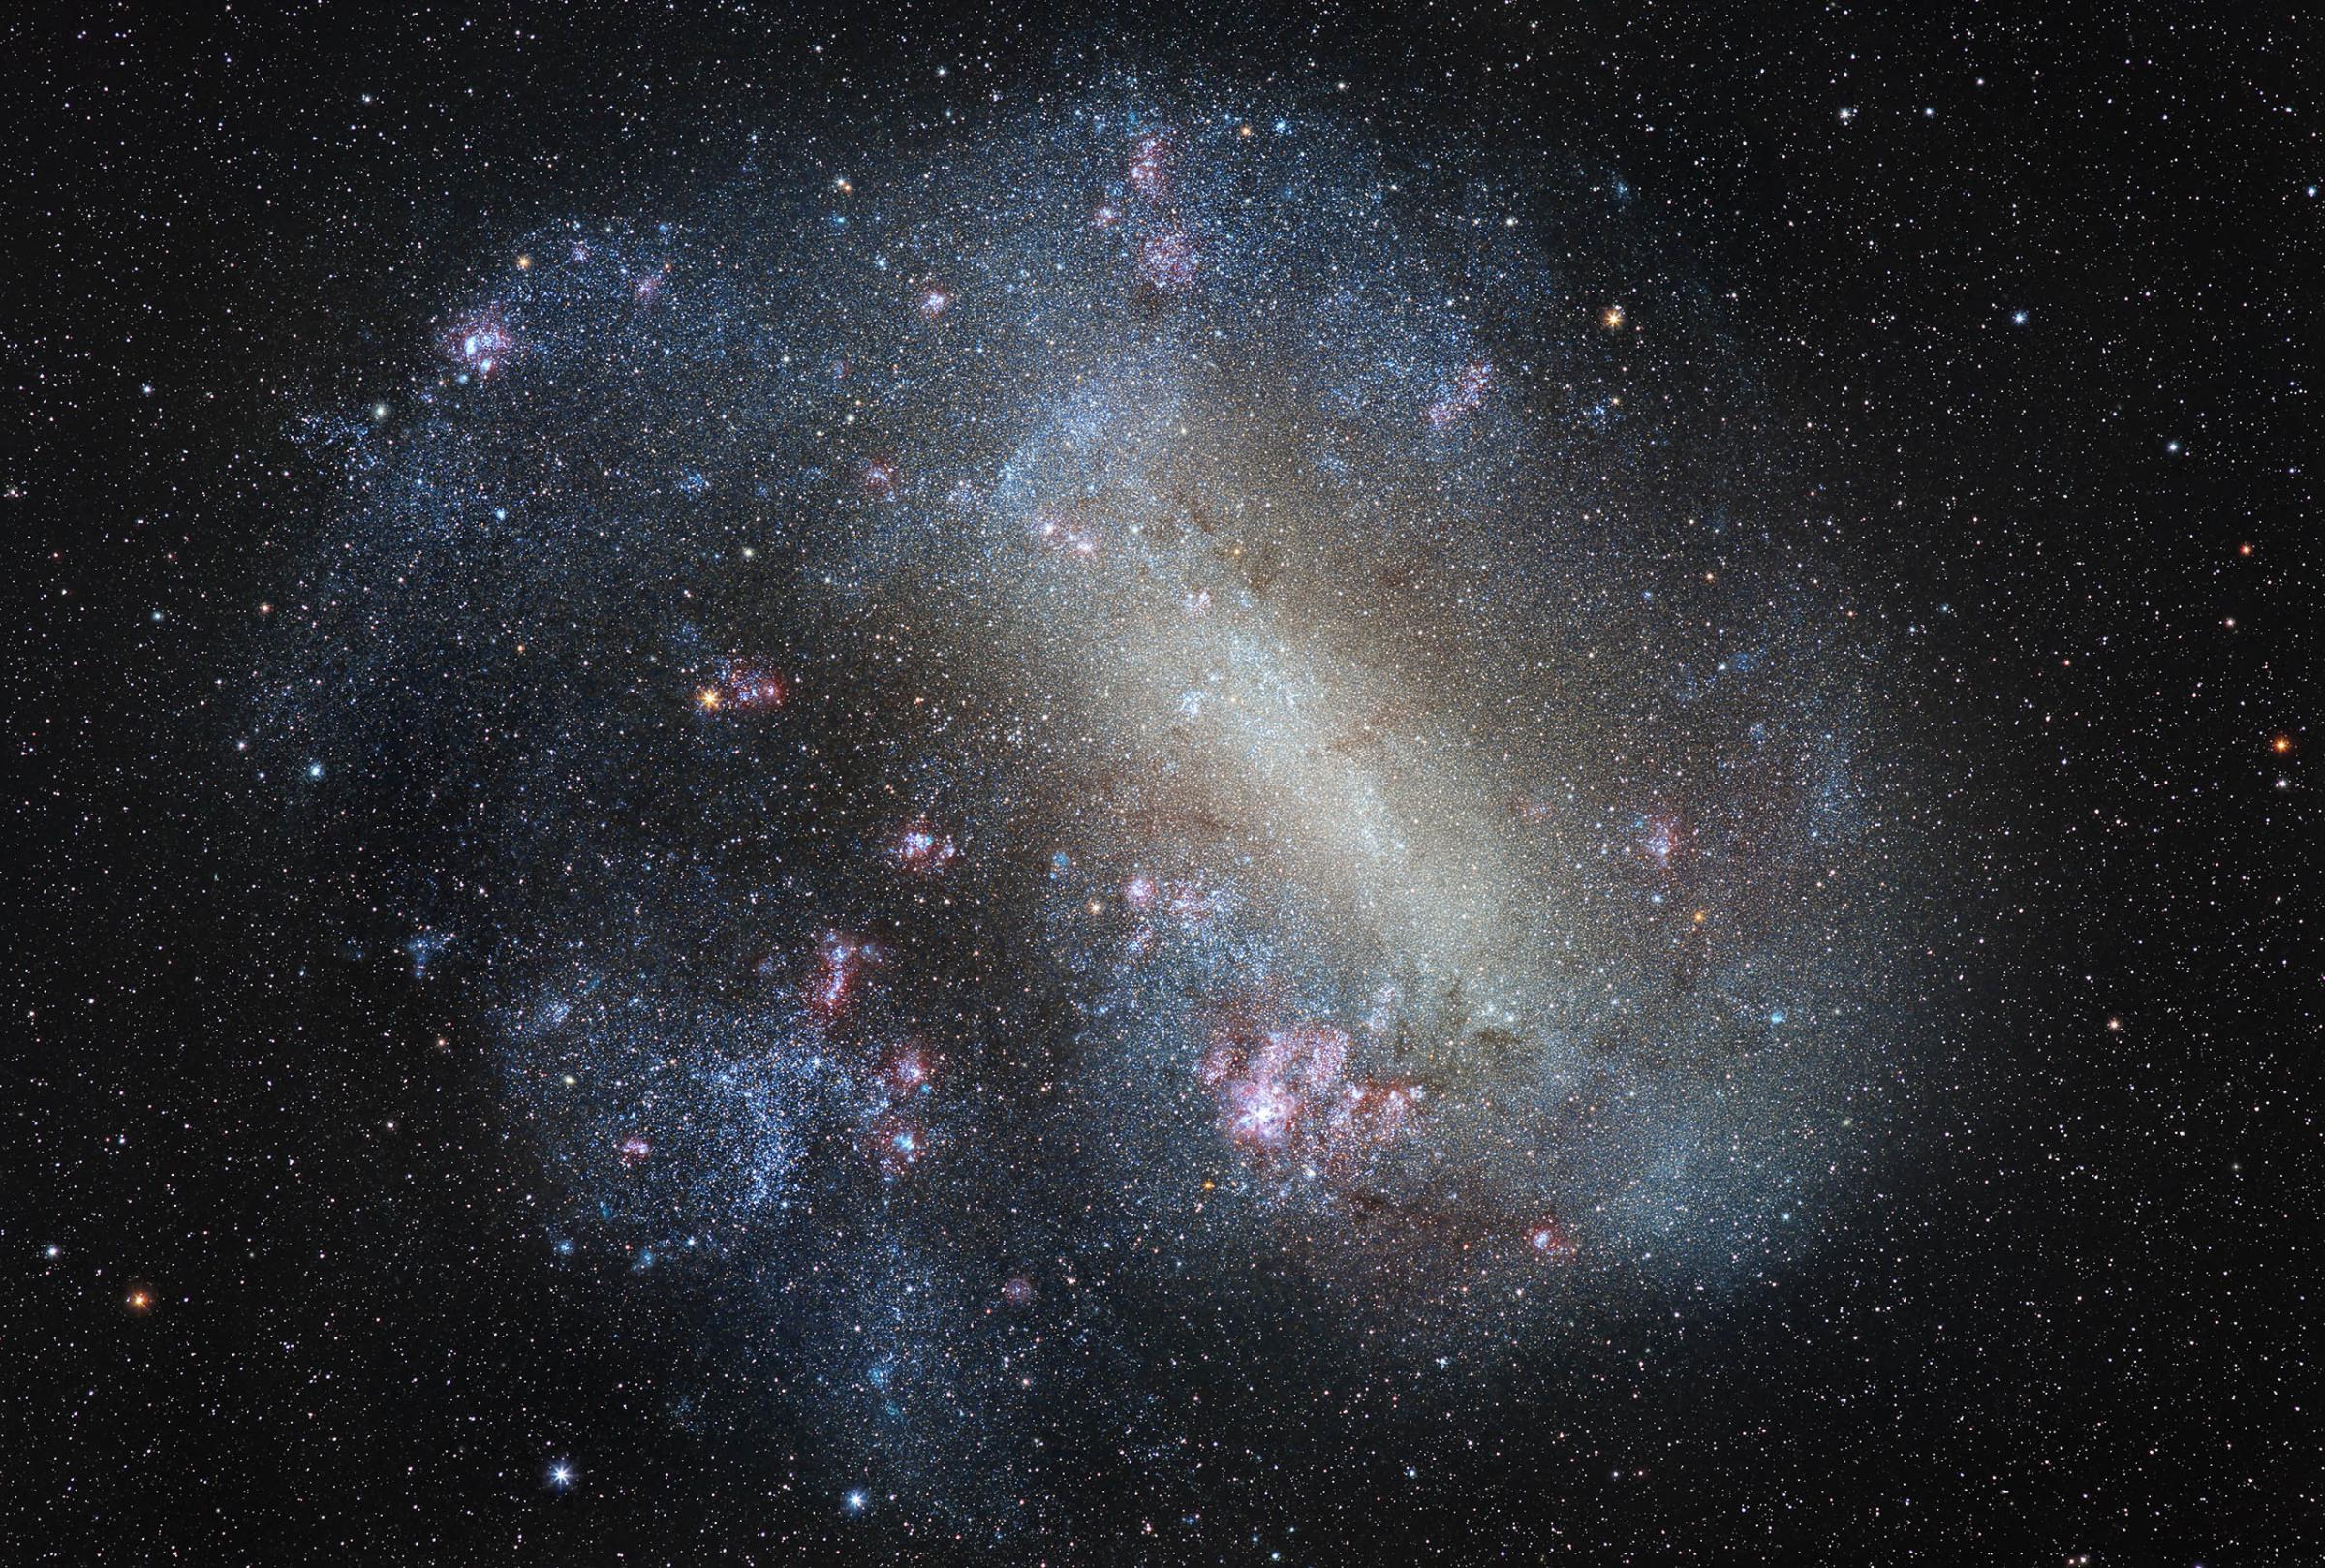 Sir Patrick Moore Prize for Best Newcomer:Carlos Fairbairn took this image of the Large Magellanic Cloud, a Milky way satellite about 14,000 light years from us, at his first astrophotography event in Luziânia, Goiás, Brazil in 2015. He believes that a feeling of "proximity" is what we're looking for when we "aim our photon collectors at the skies."